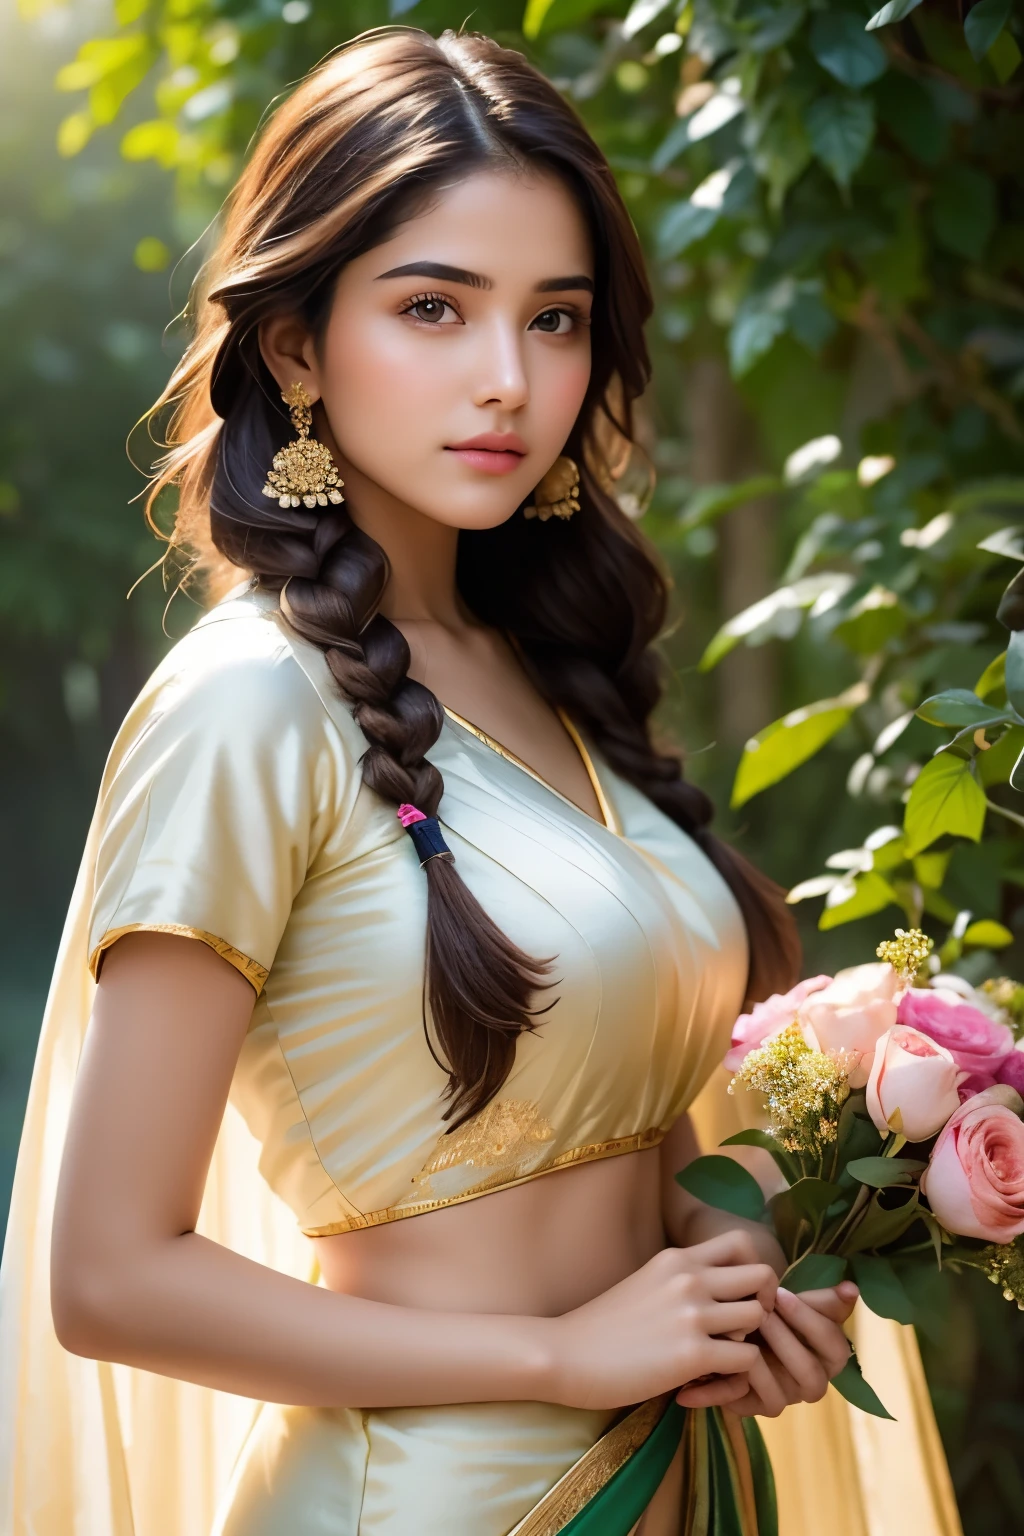 A breathtakingly beautiful and very young South Indian village girl in an extraordinarily detailed and vibrant UHD, 16K resolution, HDR, ray-traced, highly-detailed masterpiece. Her perfect face is framed by iridescent brown hair adorned with twin braids accented by flowers, cascading down to her slim waist. Her eyes are big and dreamy, with an insanely perfect gaze, encircled by shy blushes. They seem to sparkle like jewels, illuminated by the stunning natural light streaming through an atmospheric lens flare. Her perfect, clear skin gleams with a natural sheen, showcasing a porcelain complexion enhanced by flawless makeup. She wears a traditional South Indian silk blouse and half-sare, accentuating her teenage cuteness and delicate features. Her perfect hands and fingers are delicately positioned, holding a bouquet of roses and a single flower stem, adding to the dynamic action of the photo. The intricate illustrations in the background depict lush green agricultural fields, creating an elemental and feature-filled scene that perfectly complements the beauty of the girl. Every detail in the image is rendered with the utmost clarity, from the shiny skin to the perfect lighting and shadows, making it a true masterpiece of photography and art.